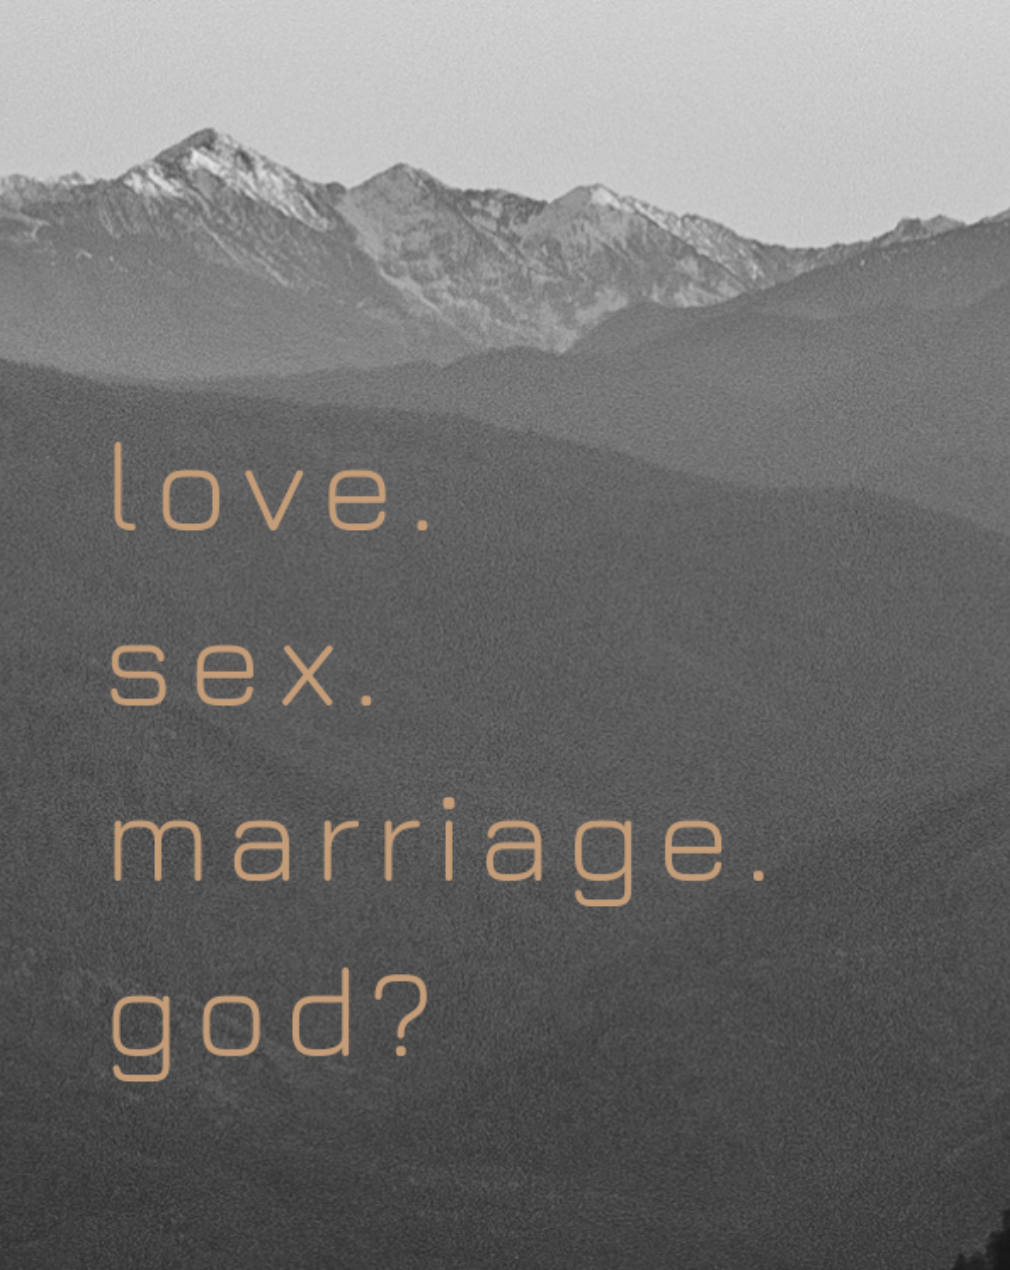 Song of Songs 2:1–3:5. The Limits of Love.